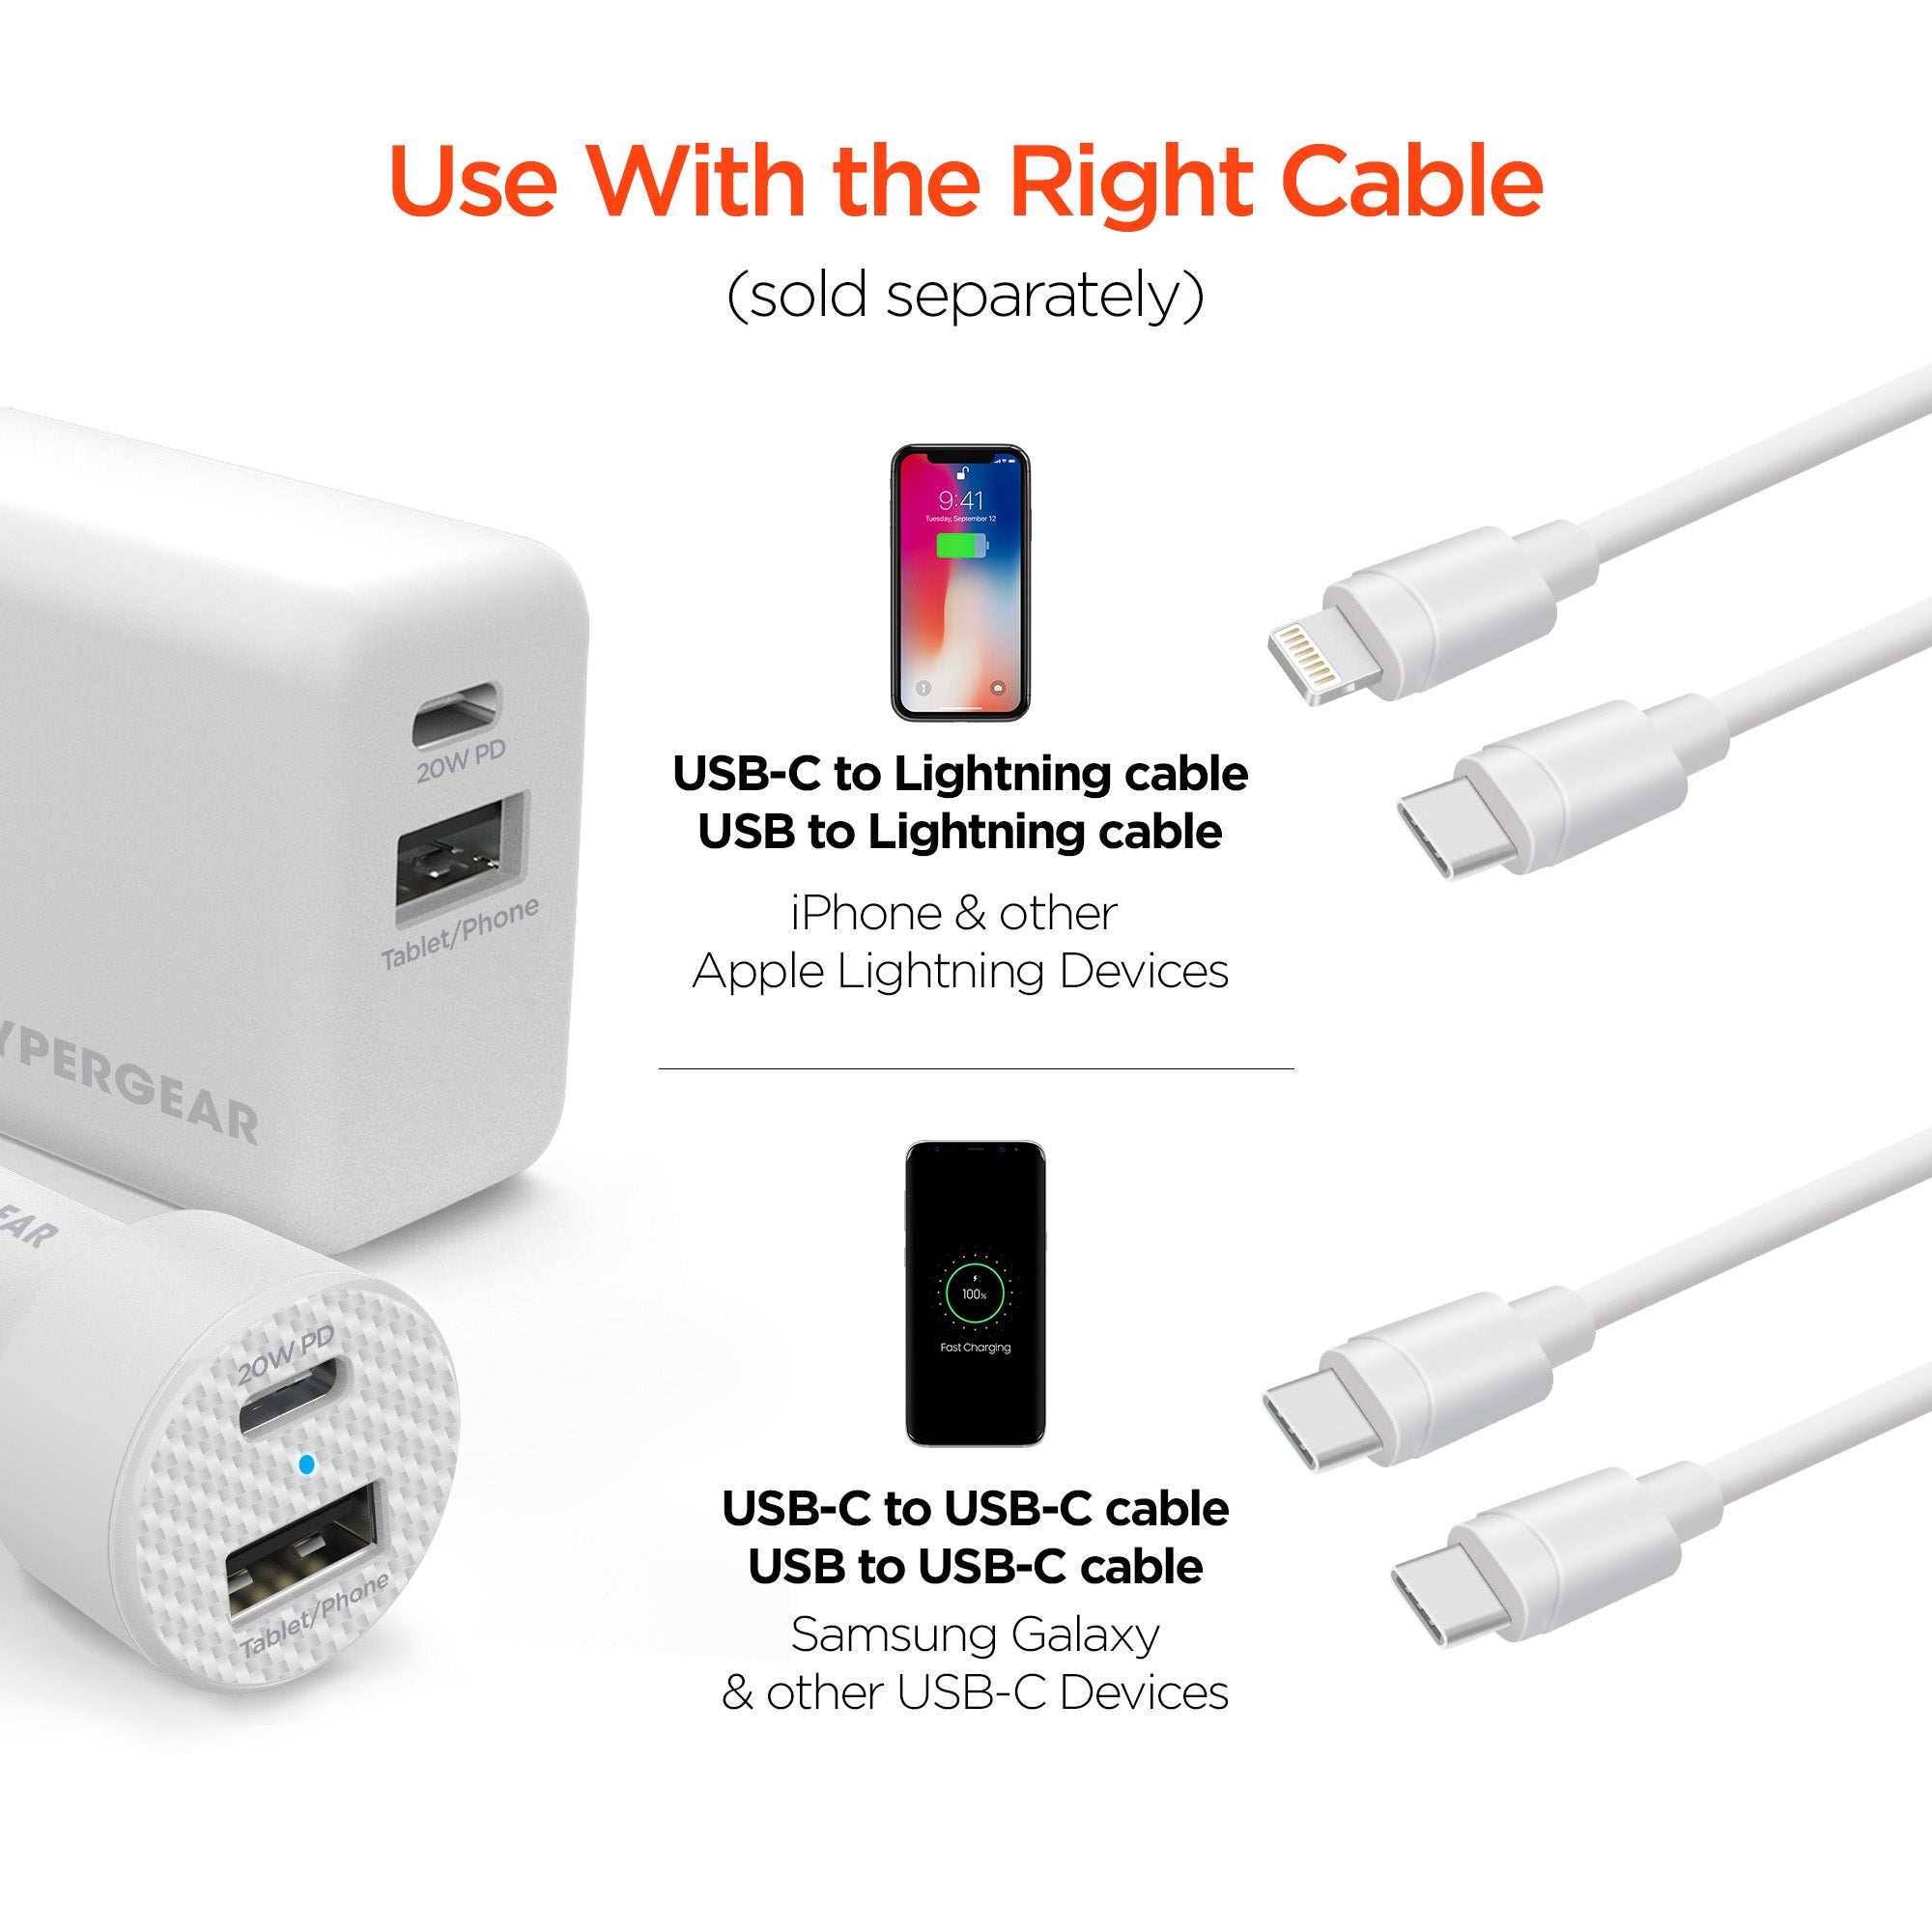 20W USB-C Port Mains Charger Pack + USB-C to Lightning Cable